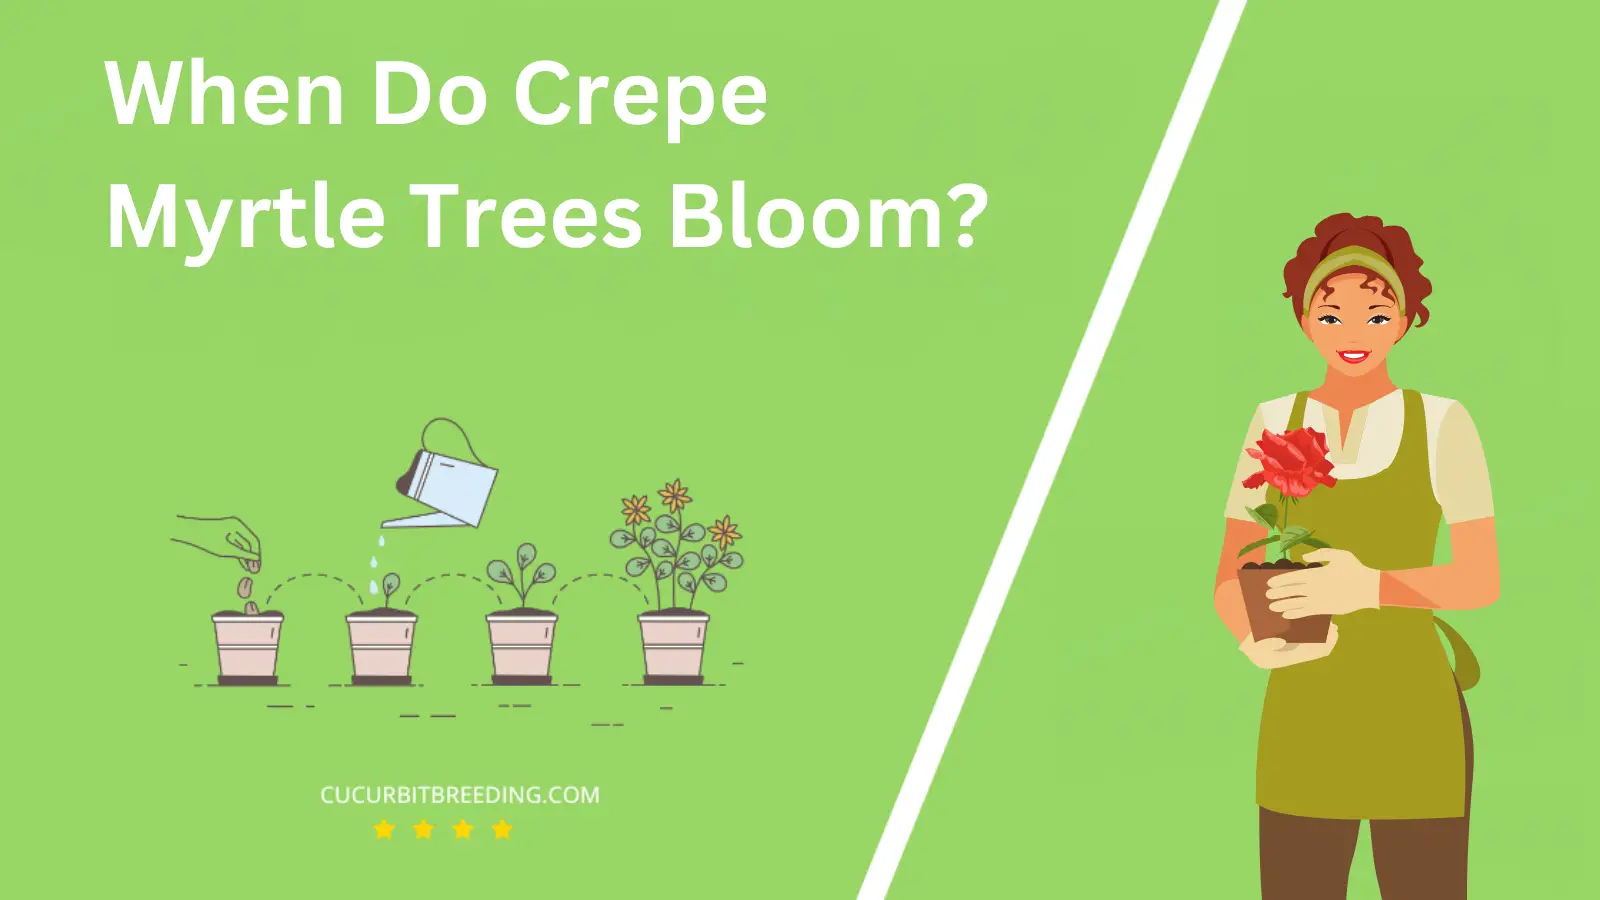 When Do Crepe Myrtle Trees Bloom?